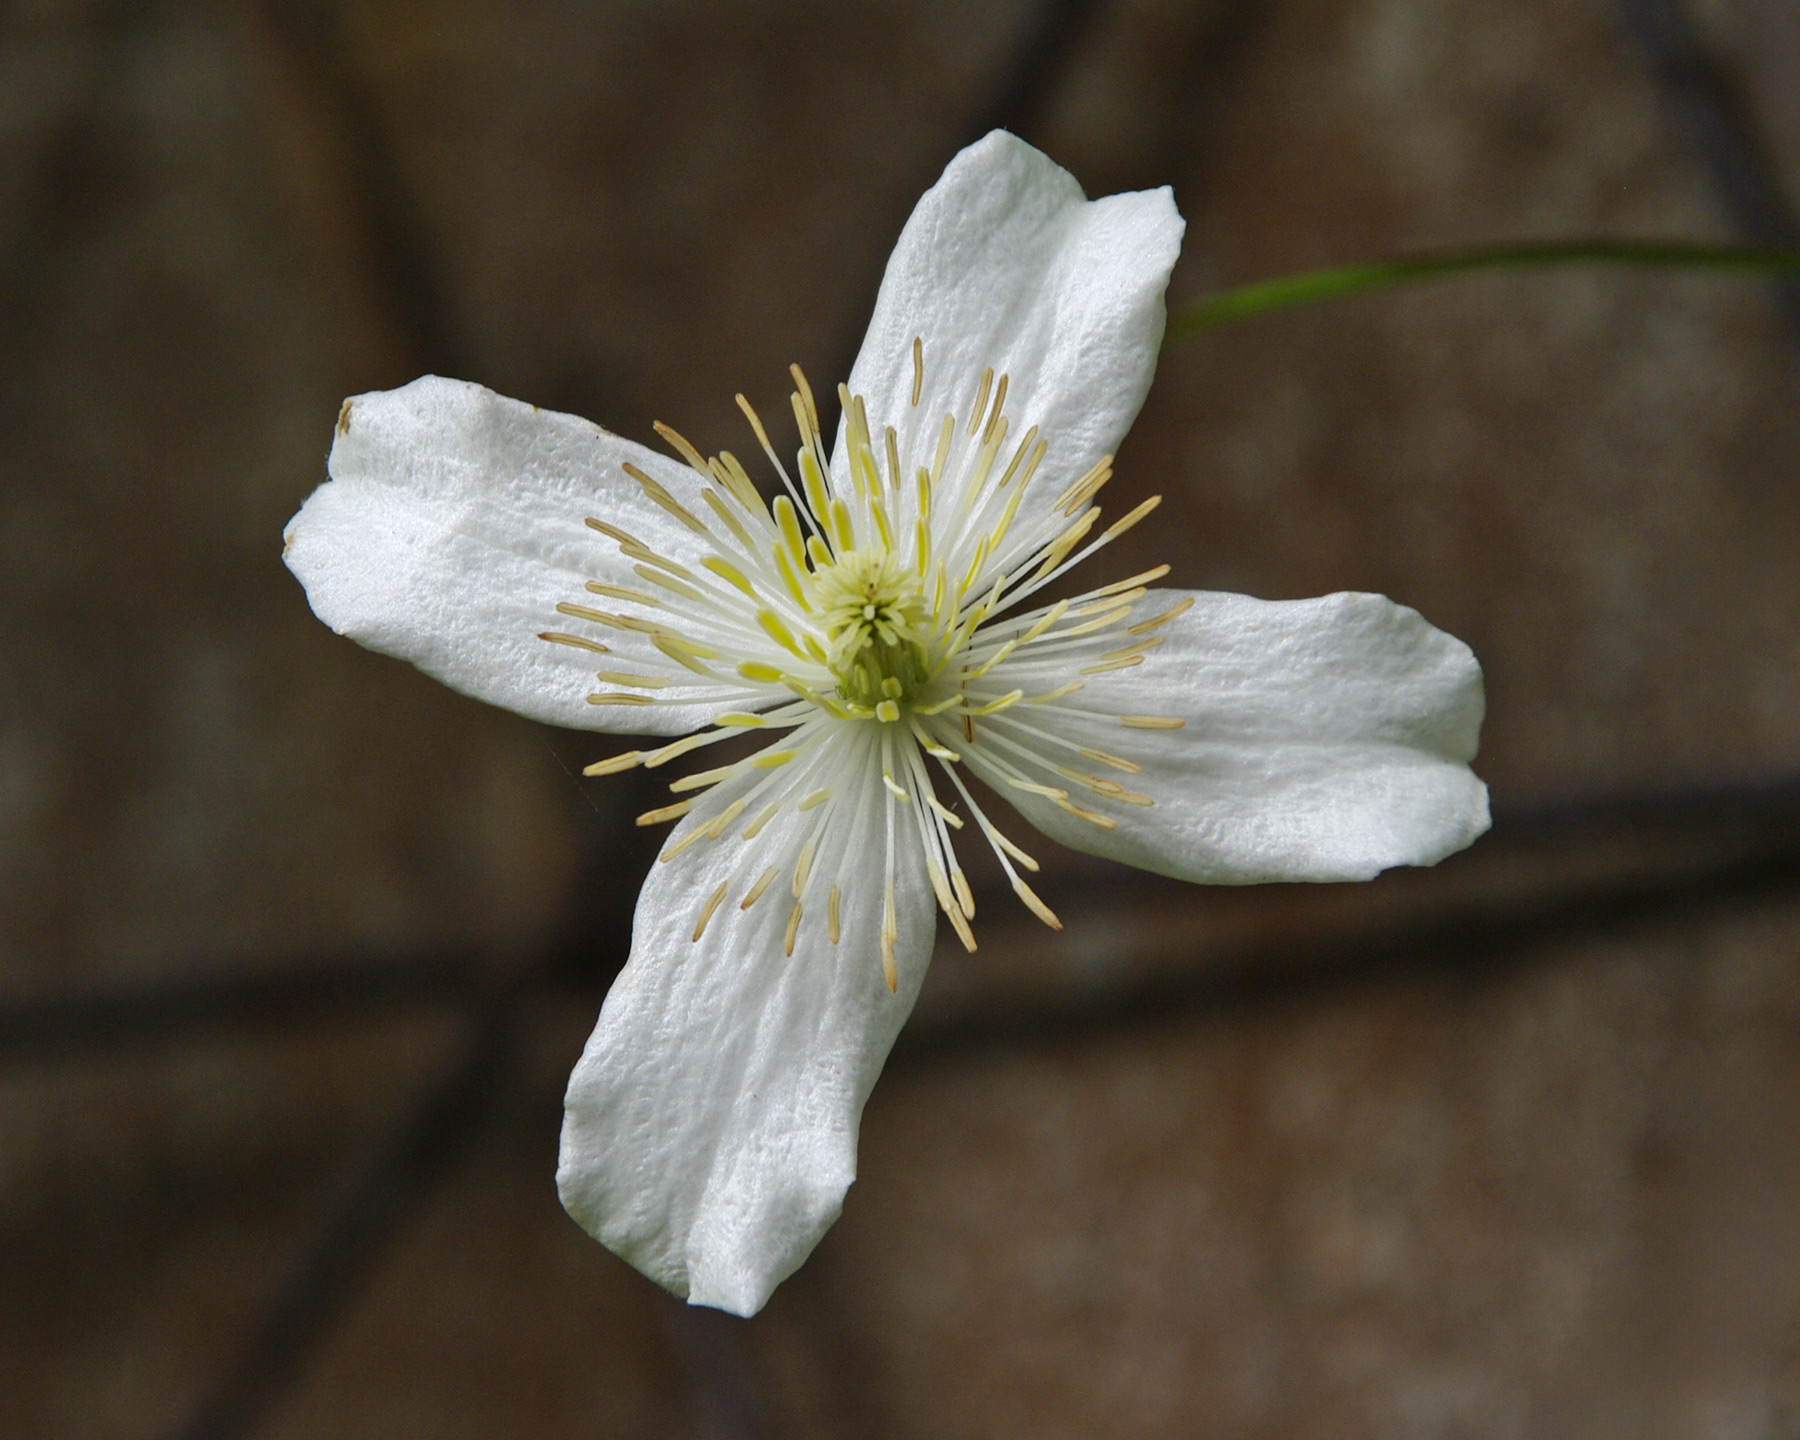 The pure white flowers of Clematis montana